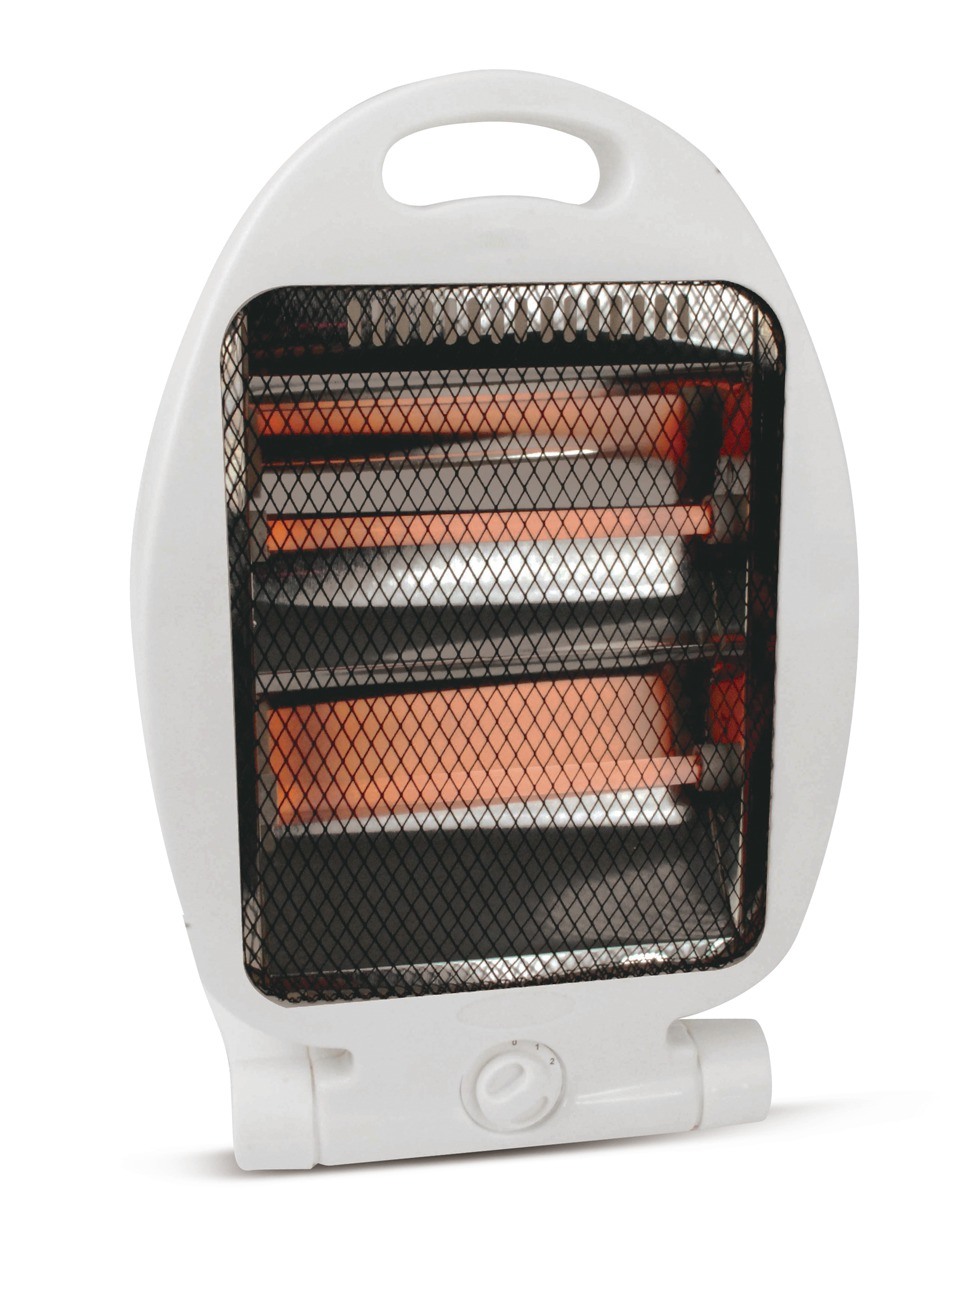 Halogen Heater, with GS, CE, RoHS-Marked